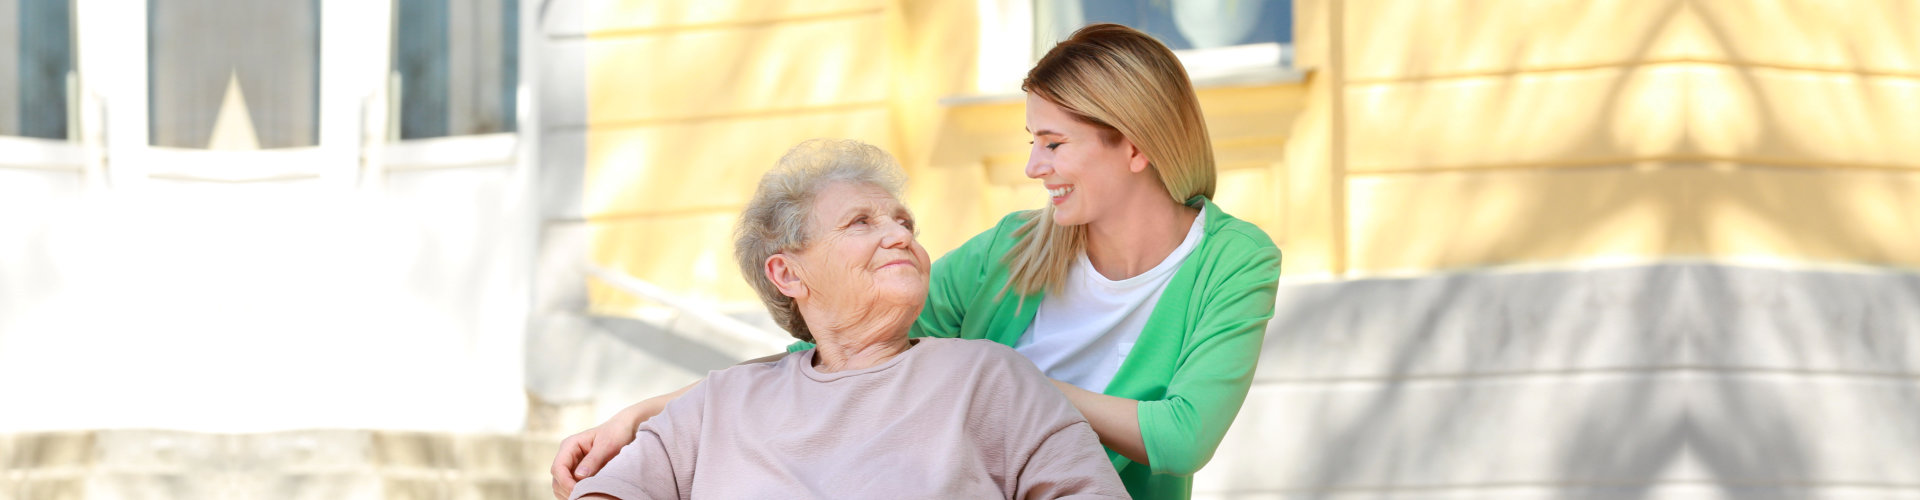 caregiver and her patient smiling at each other